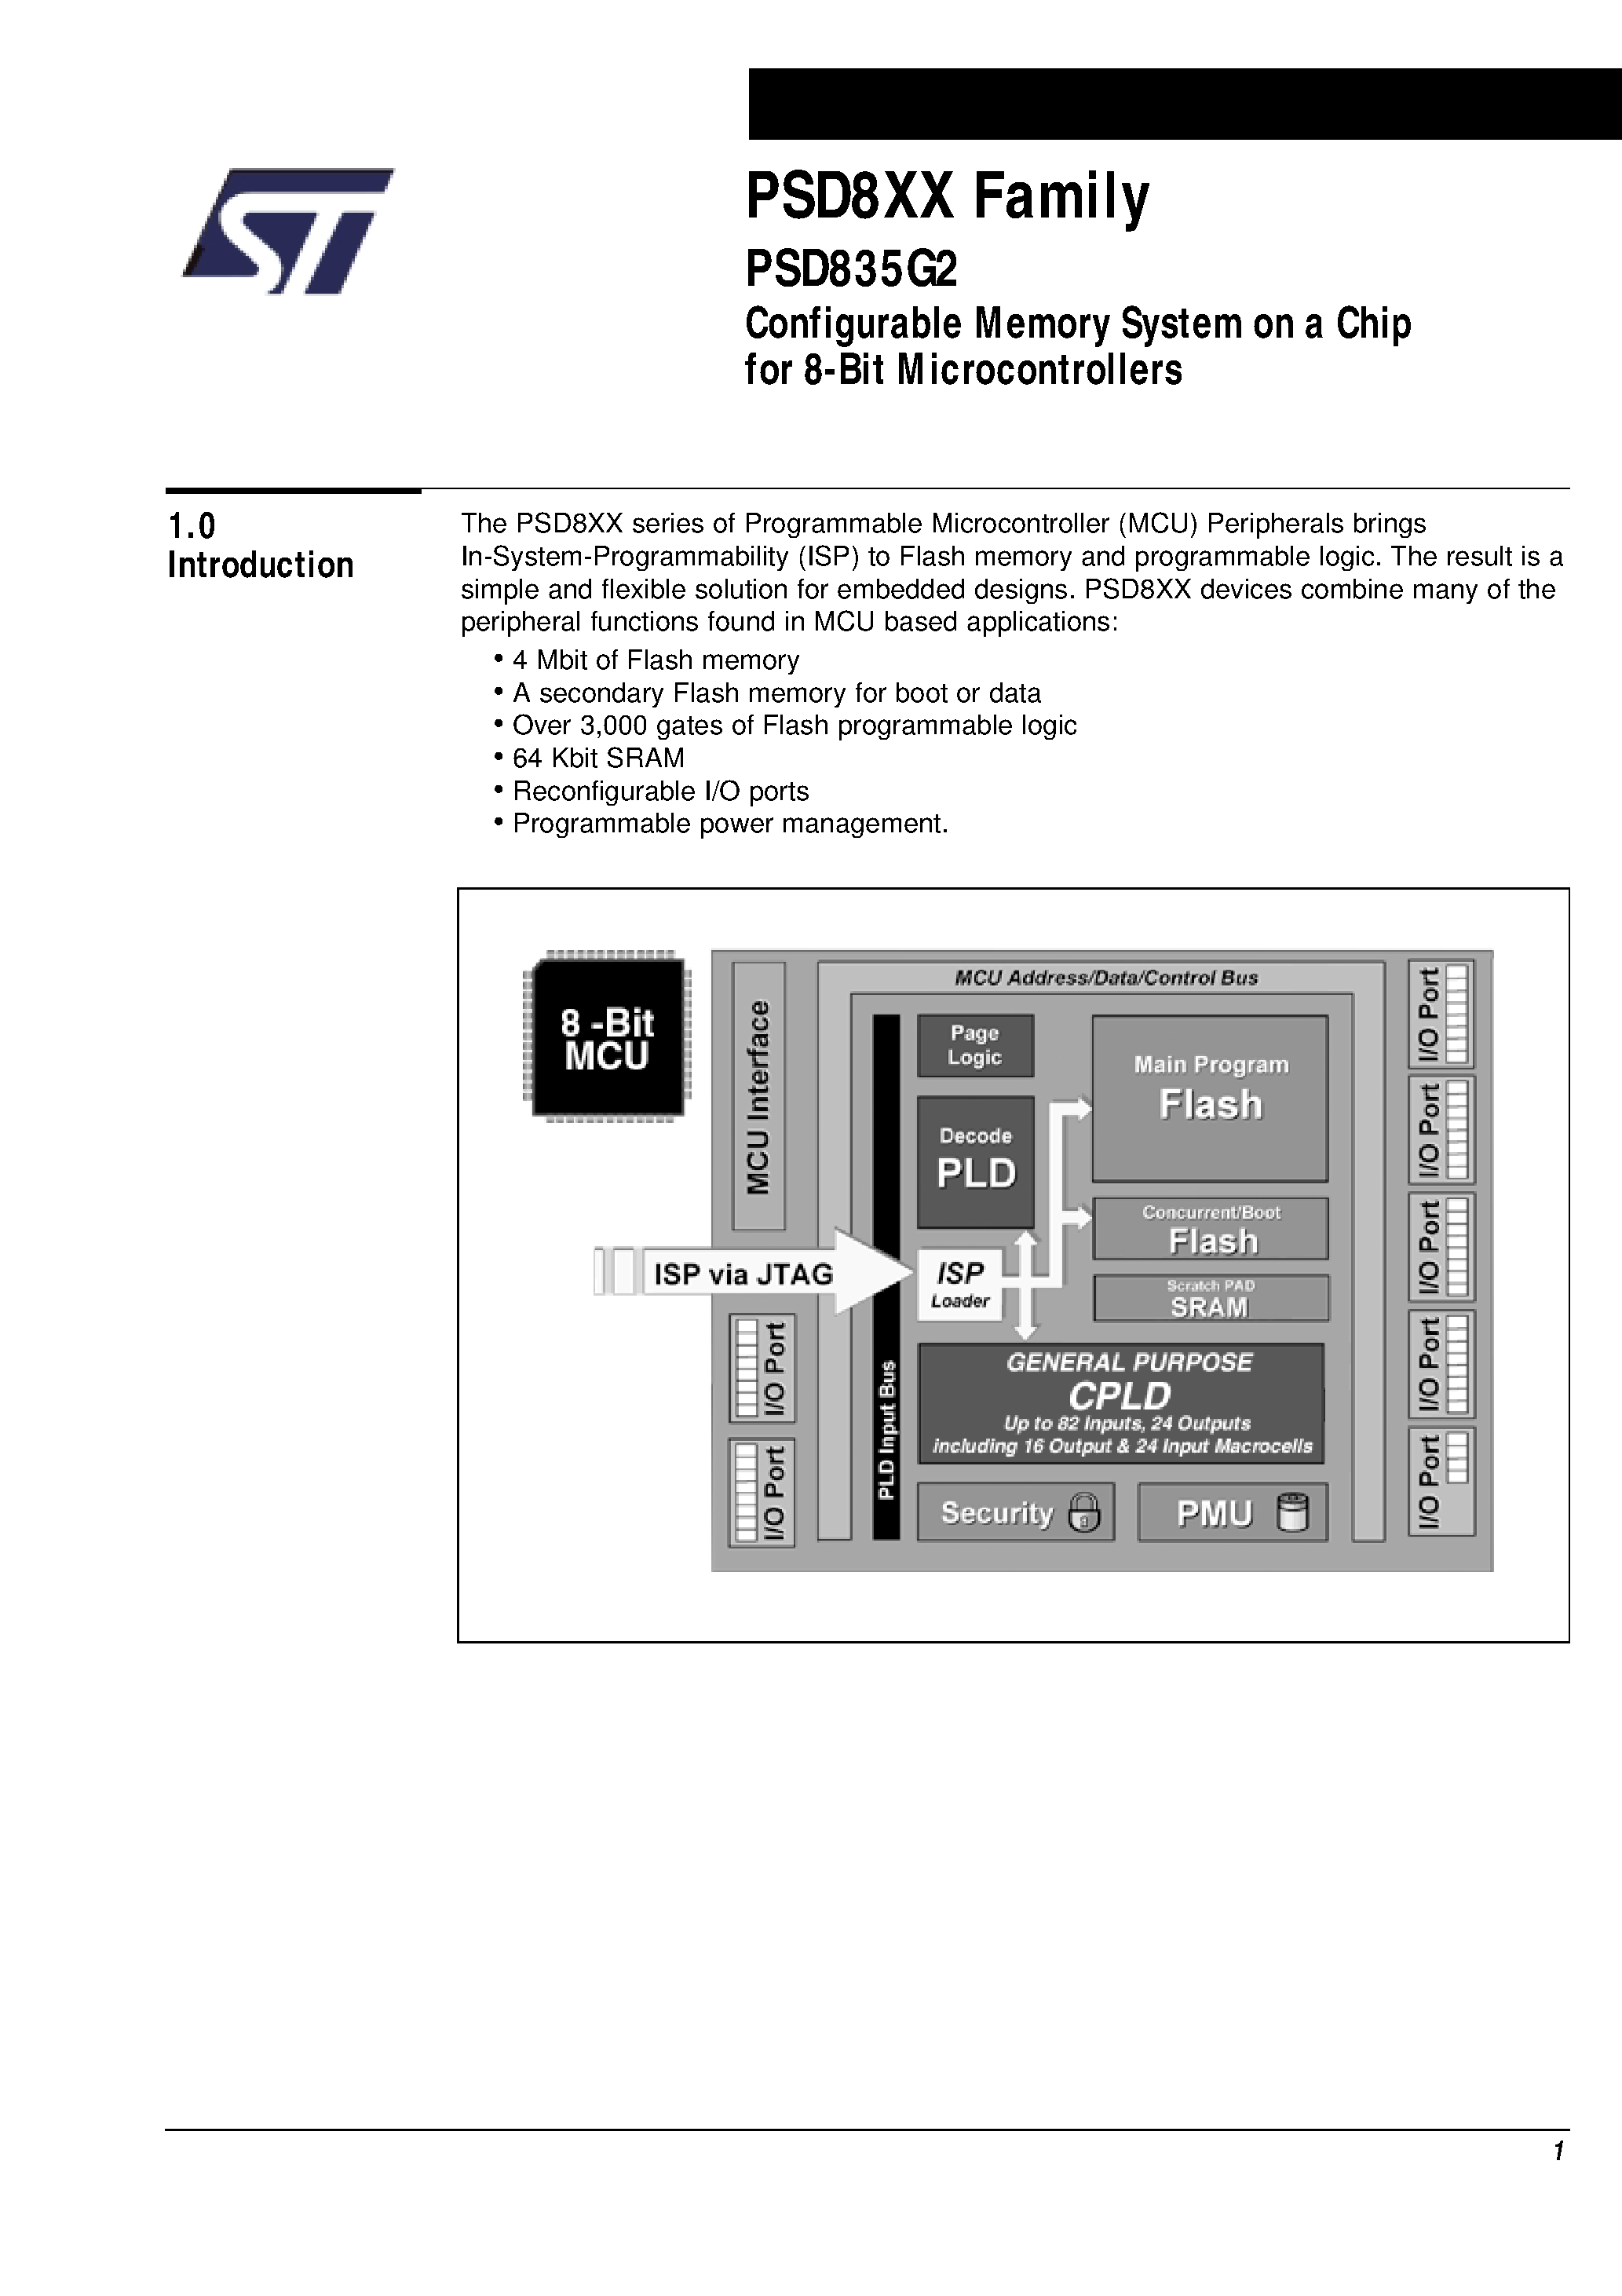 Datasheet PSD835F2-A-12U - Configurable Memory System on a Chip for 8-Bit Microcontrollers page 2